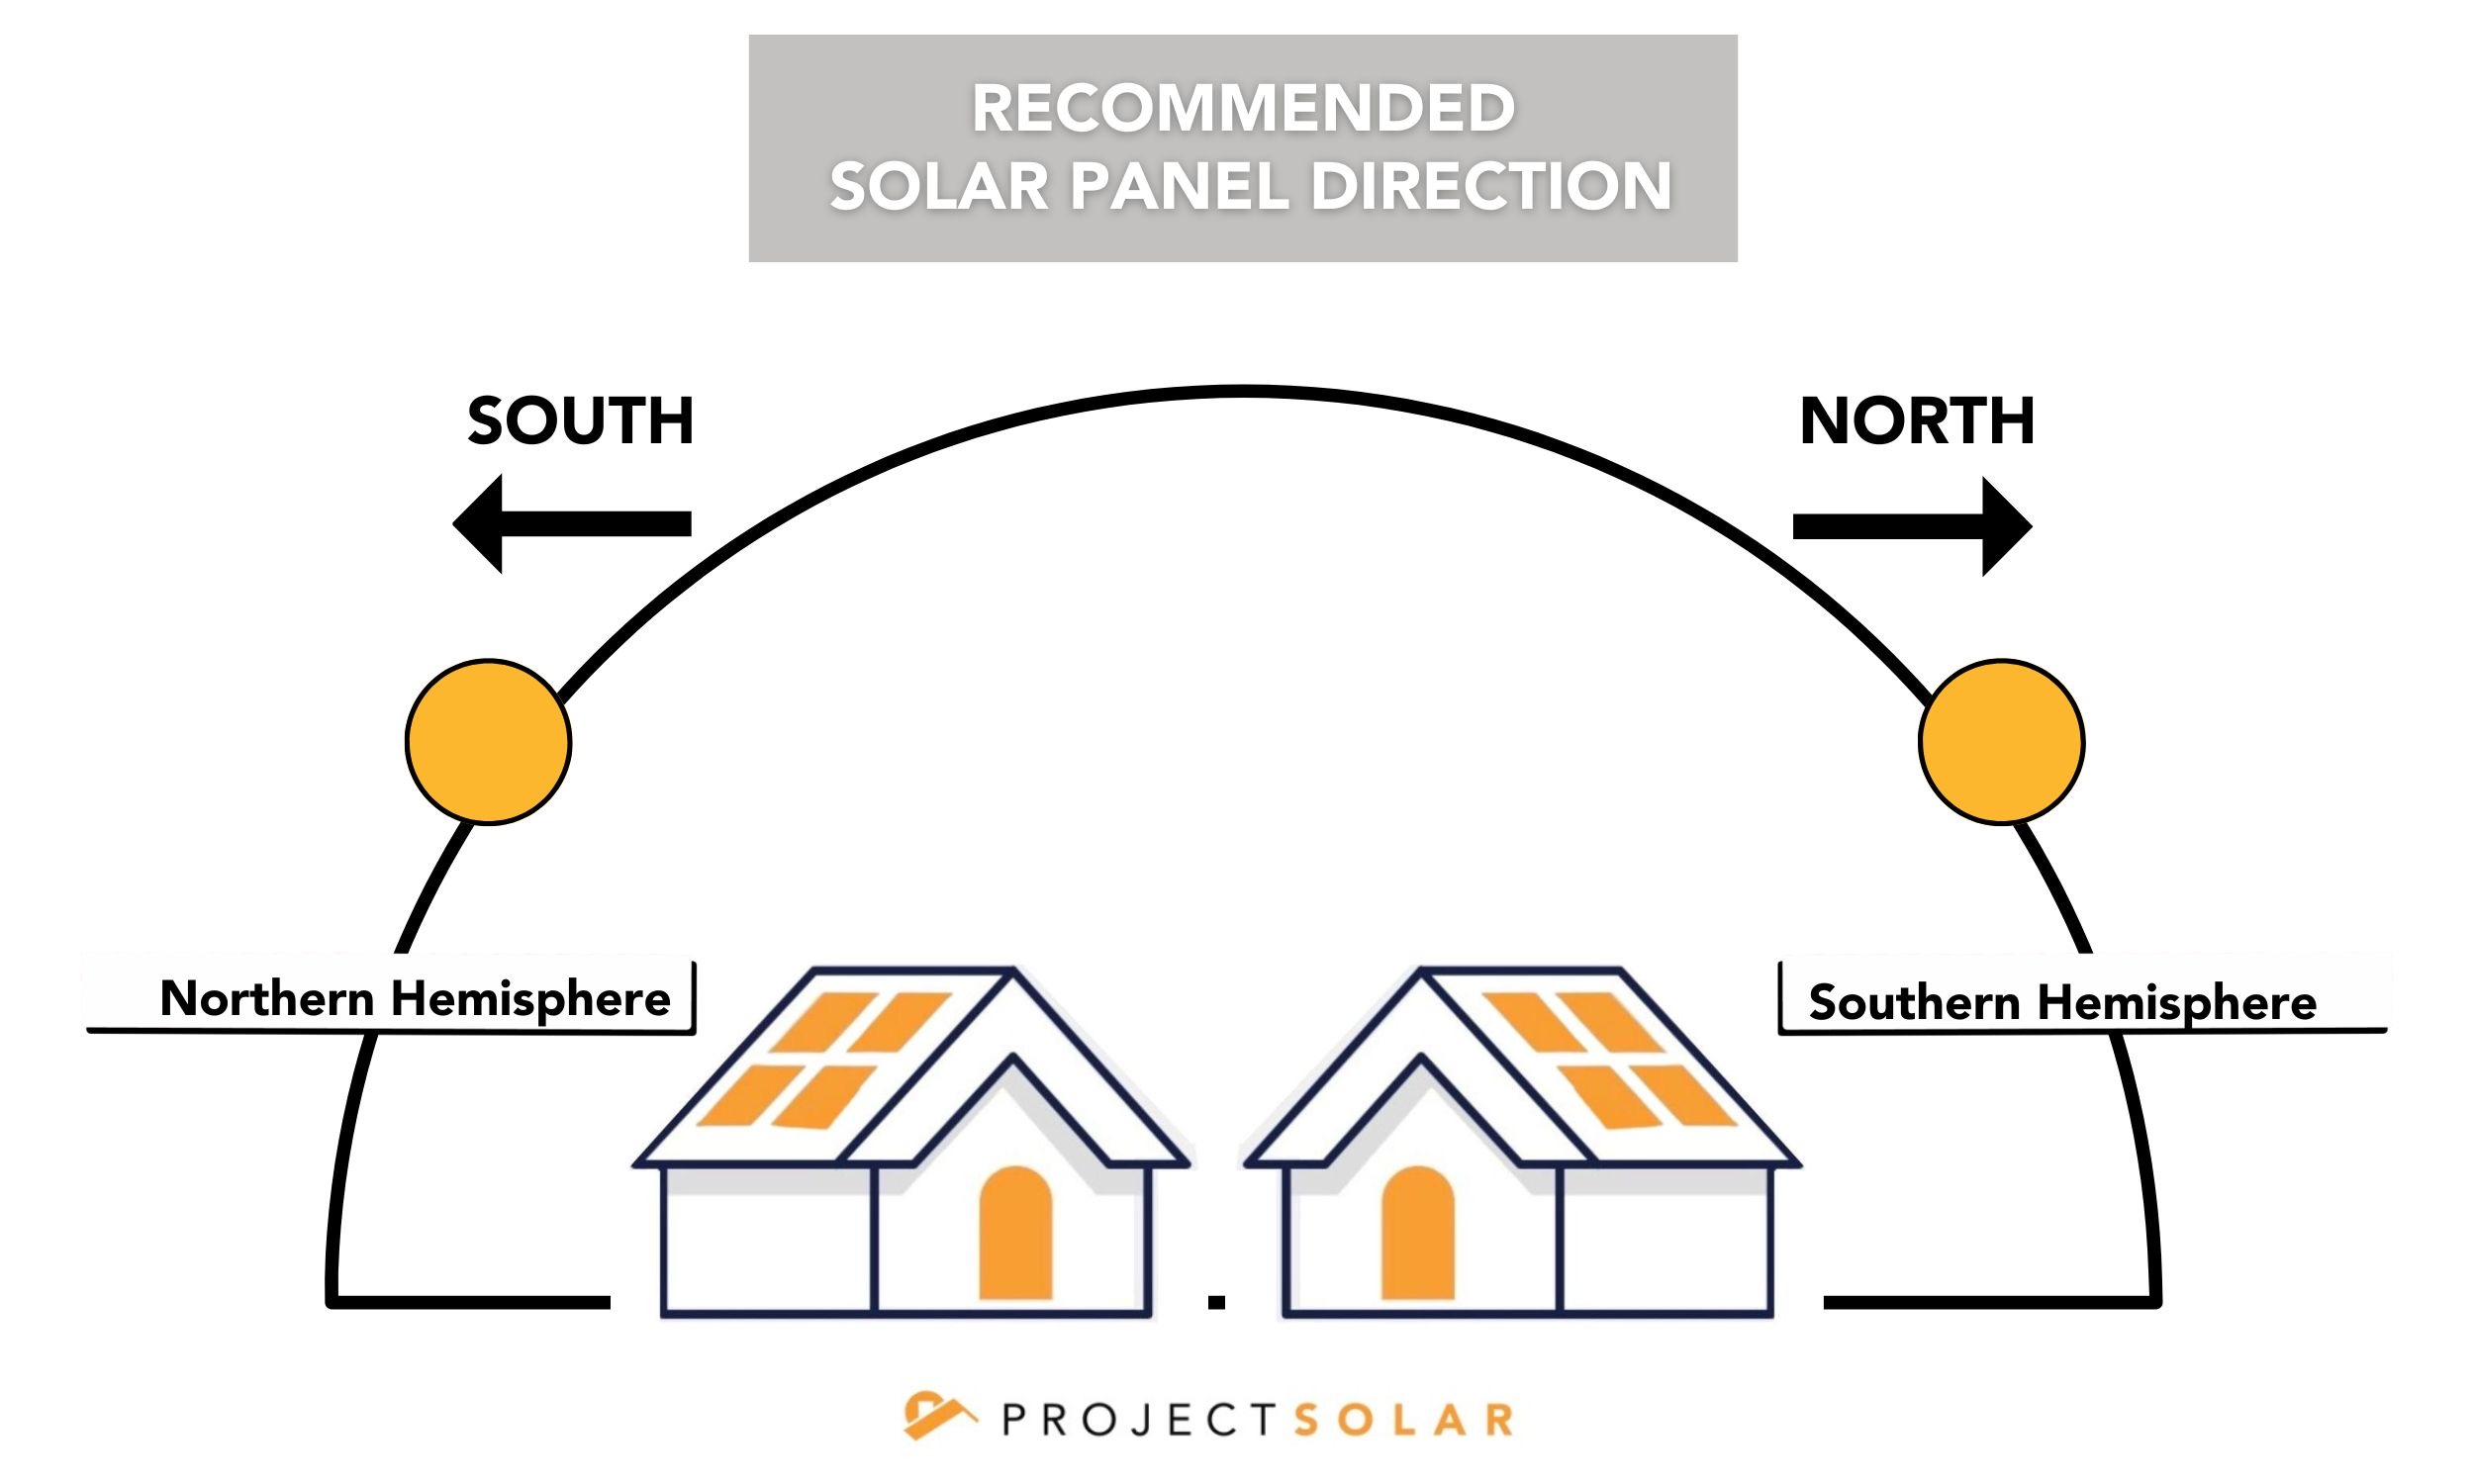 Illustration demonstrating the ideal placement of solar panels on a roof based on the hemisphere: in the southern hemisphere, the optimal position is on the northern side of the roof, while in the northern hemisphere, it is on the southern face of the roof.